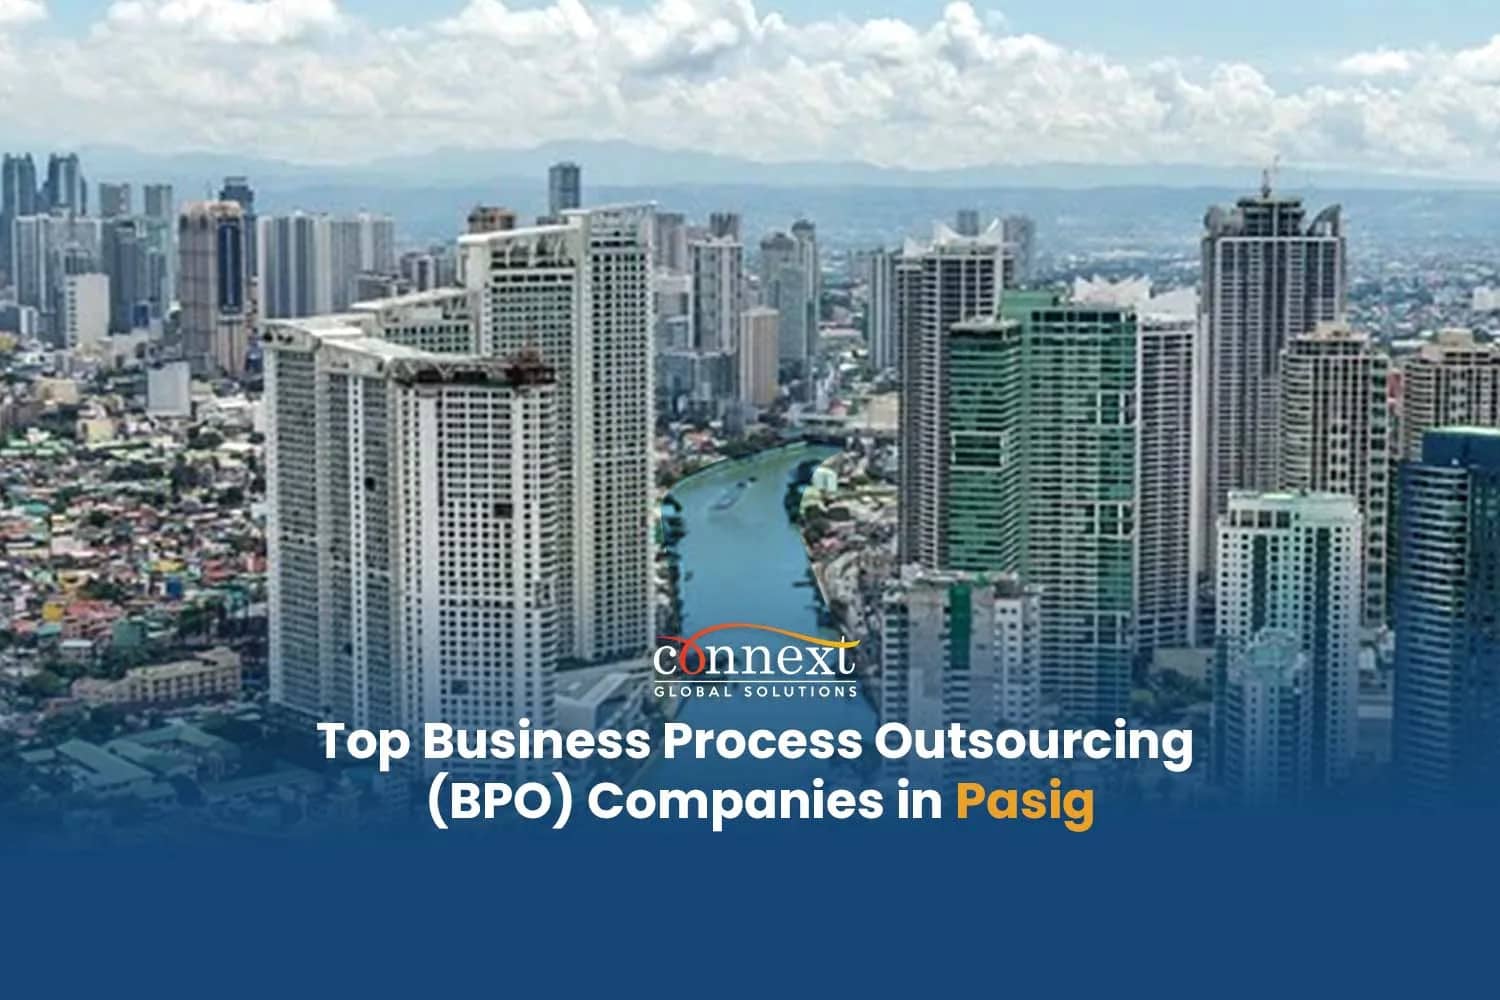 Top Business Process Outsourcing (BPO) Companies in Pasig